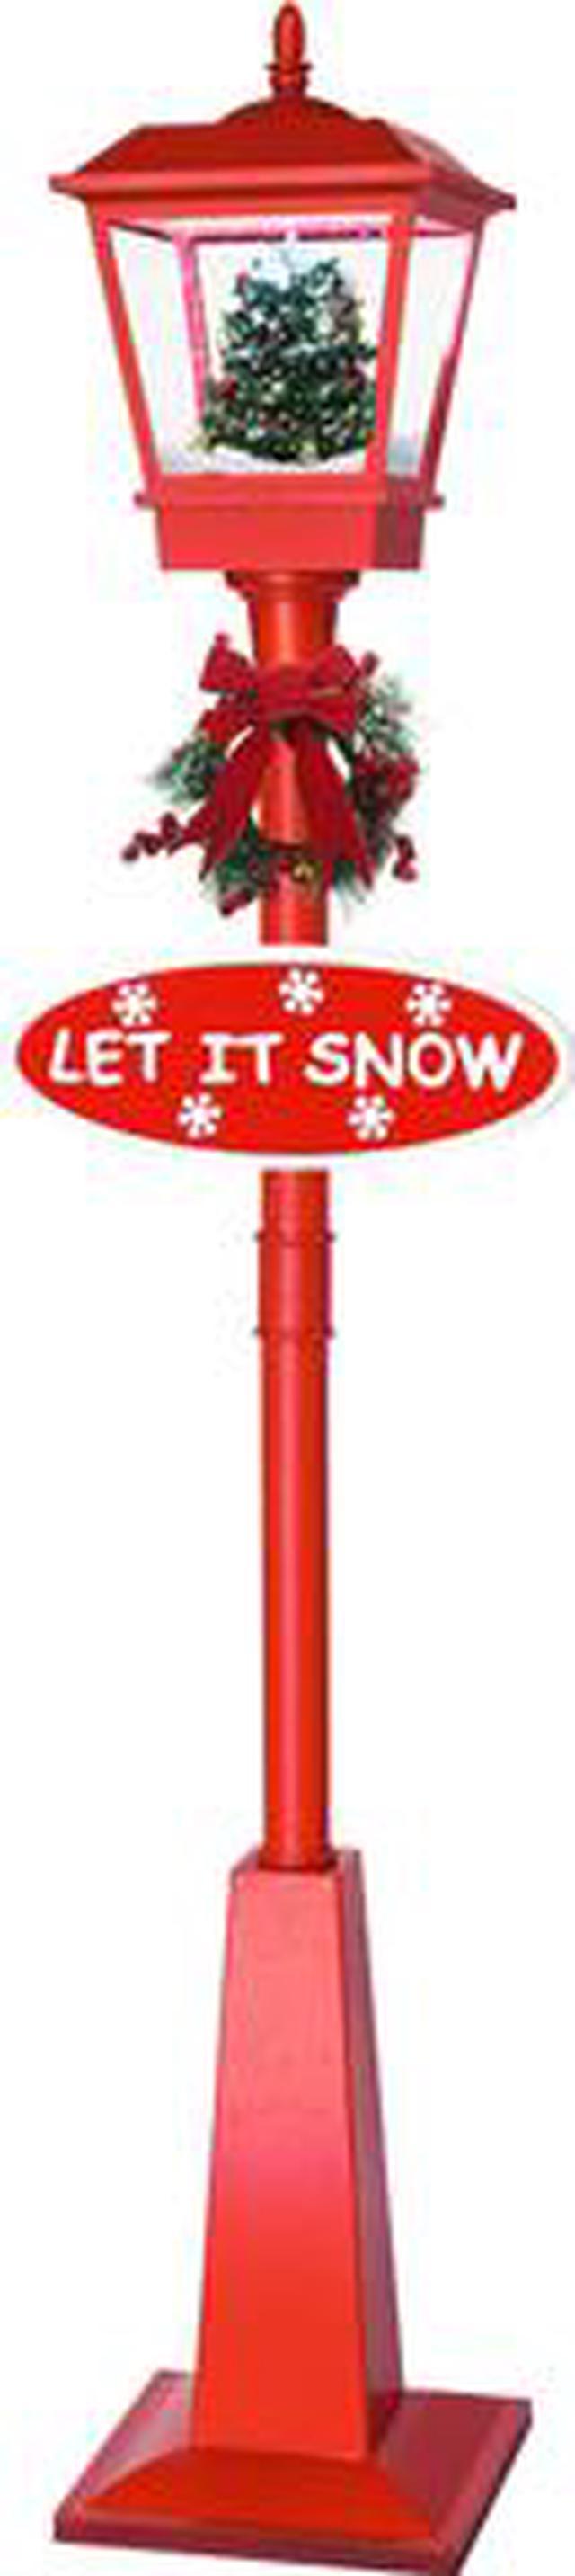 Fraser Hill Farm 71 in. Double Musical Lamp Post with 2 Red Lanterns and Snow